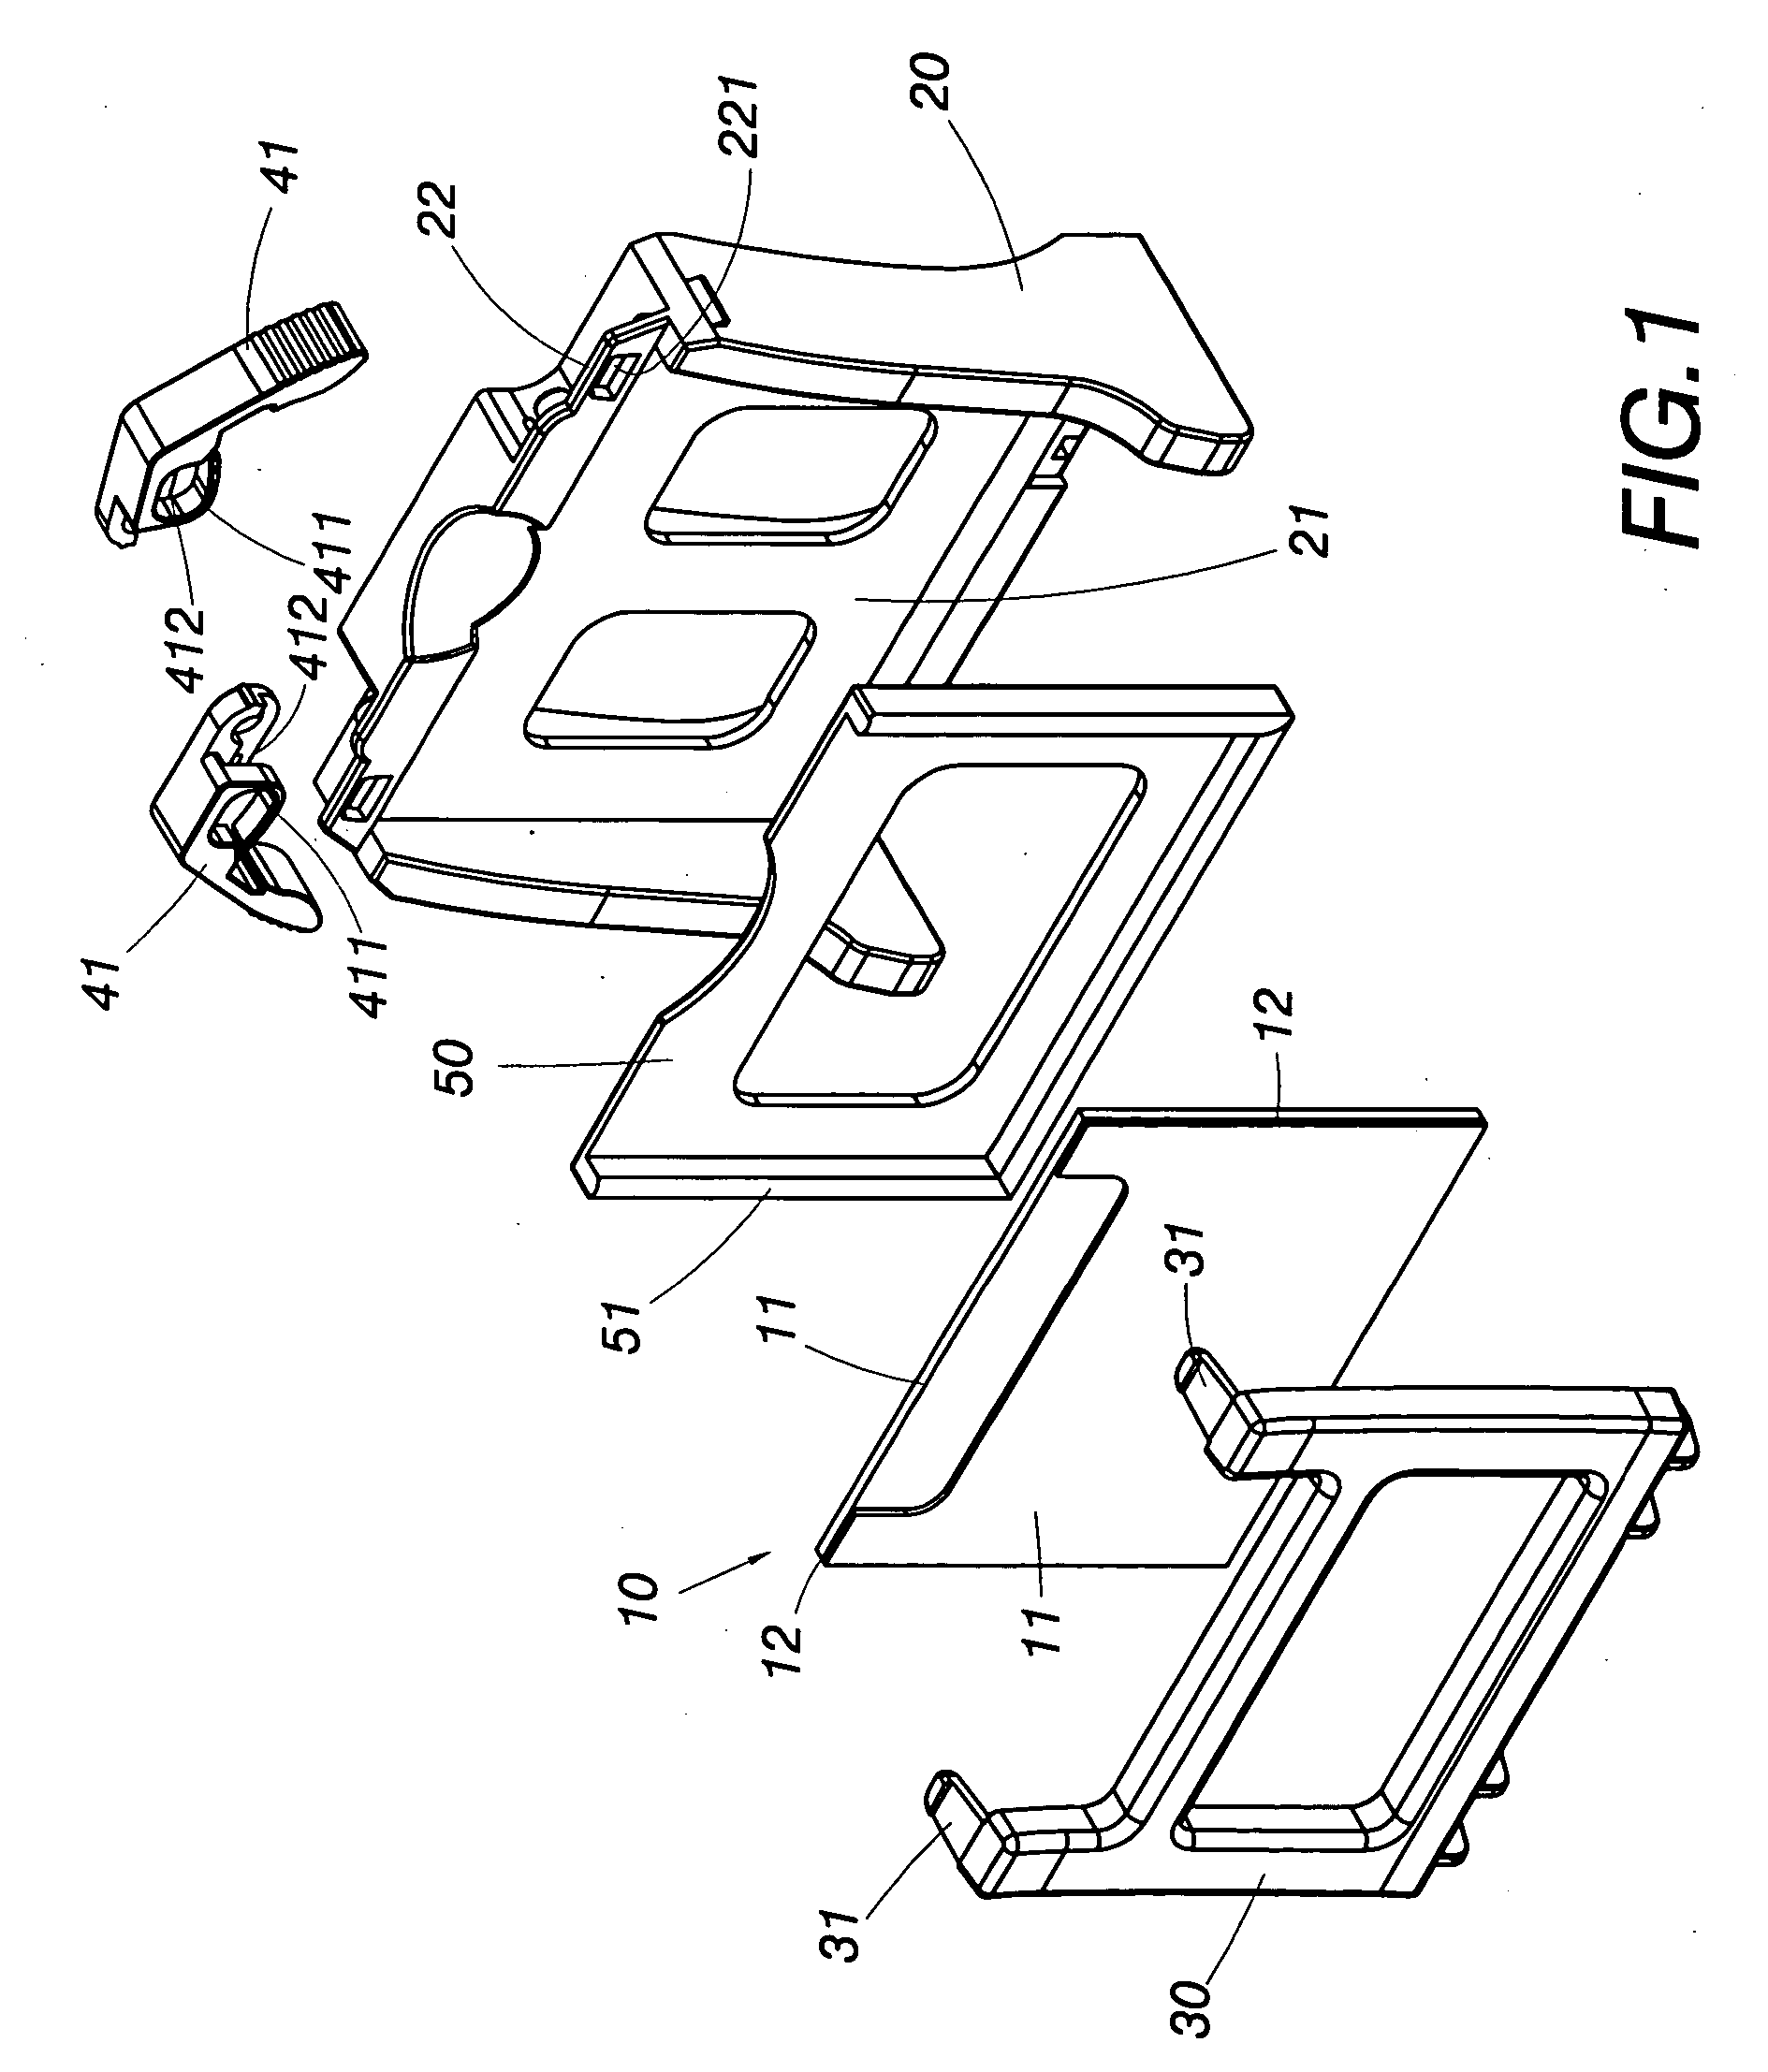 Gel casting module and electrode module of an electrophoresis device